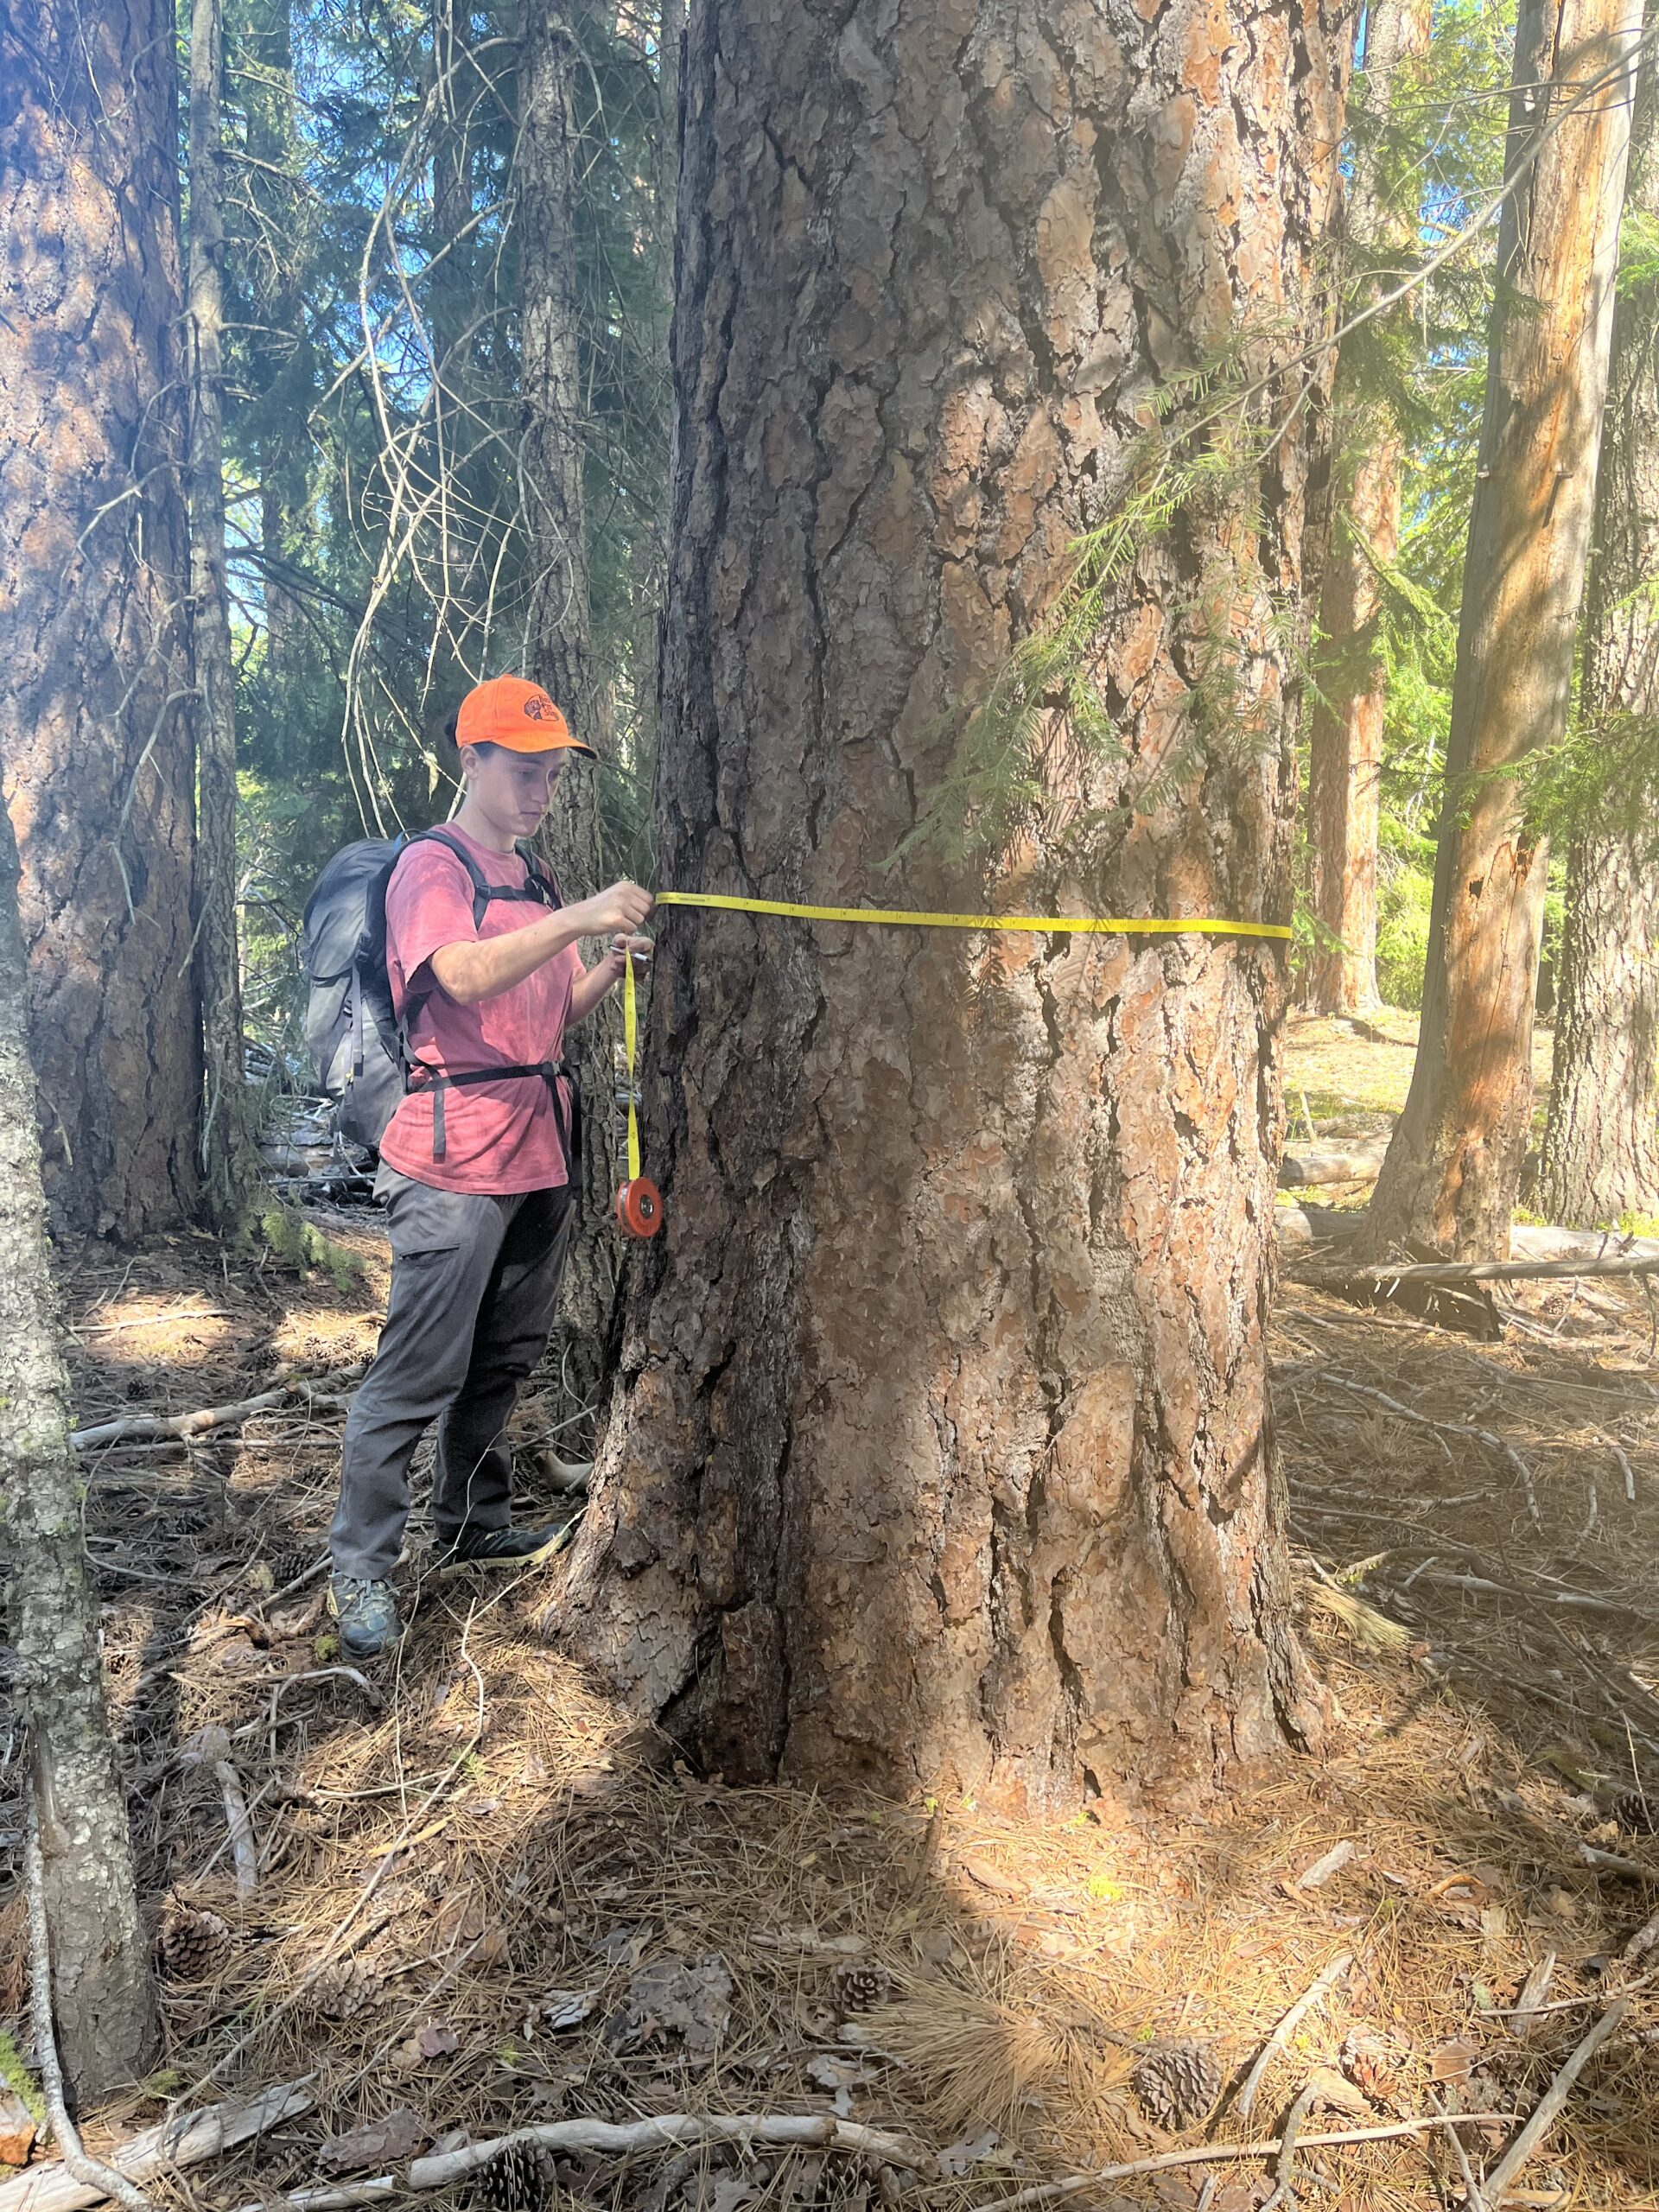 Misha, Bark's Forest Watch Coordinator, in a neon orange ball cap and pink t-shirt is seen measuring the circumference of a large tree with a yellow measuring tape. Their eyes are focused in front of them where the two ends of the tape meet.